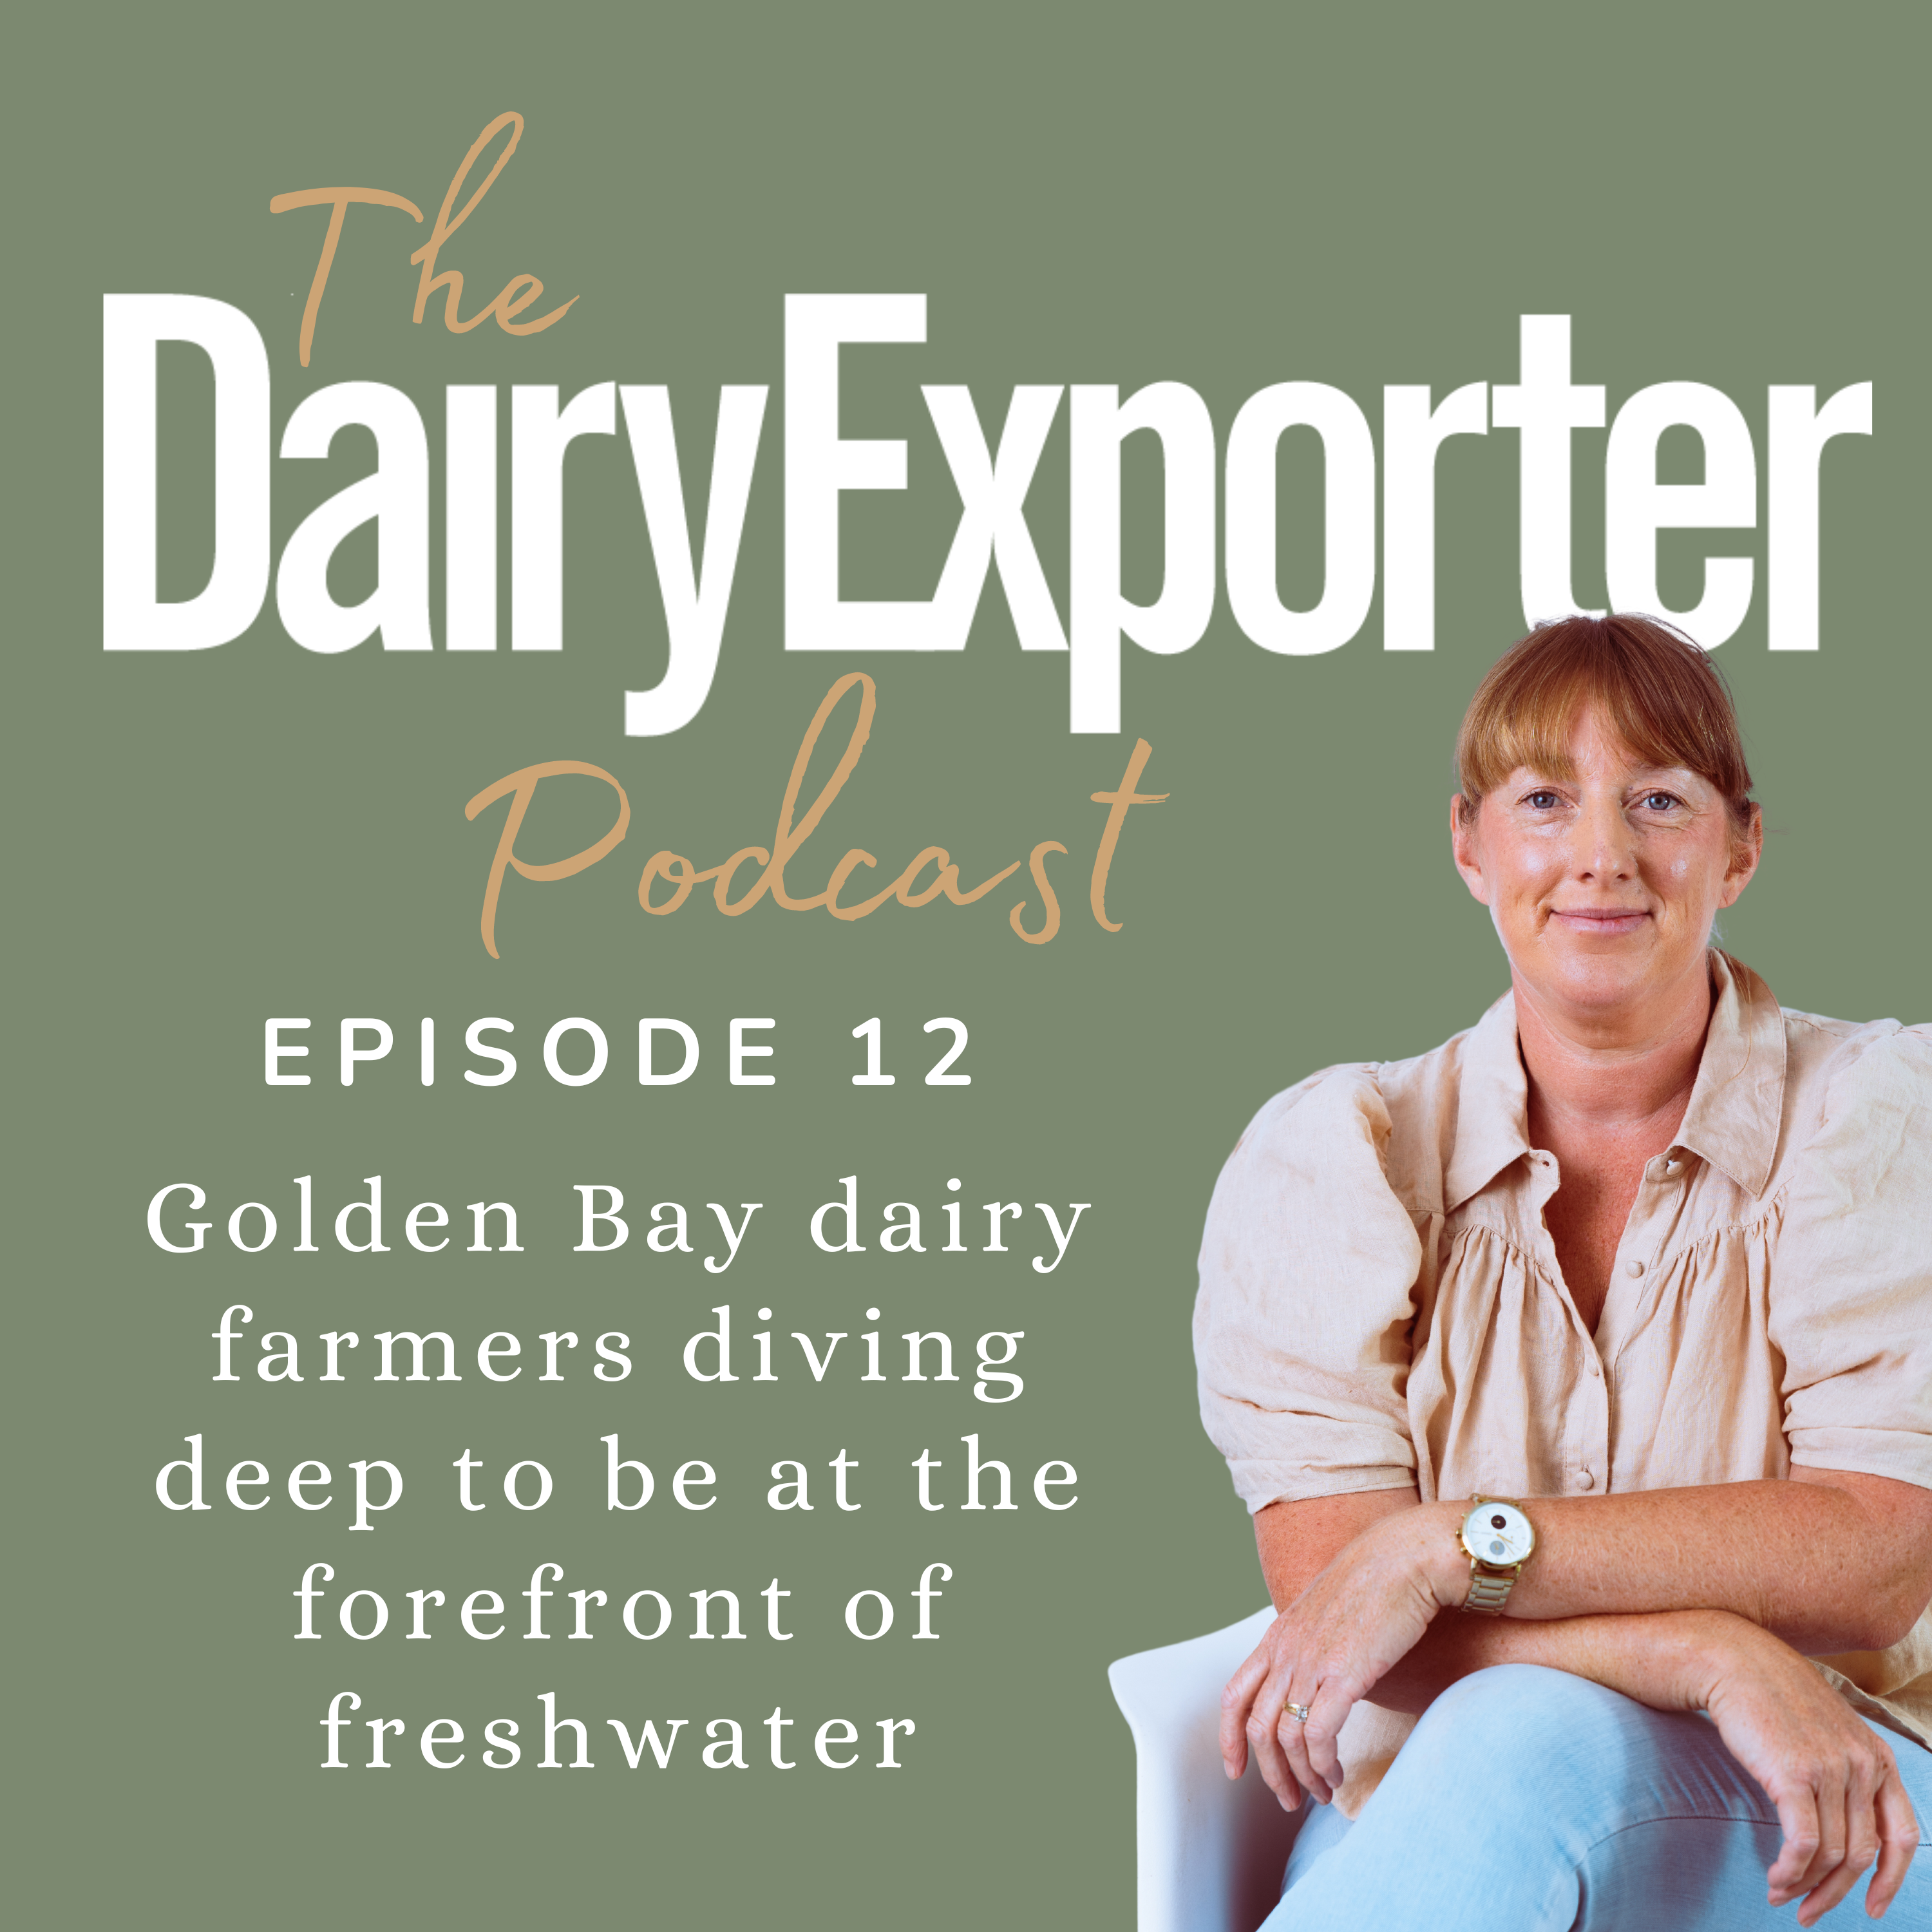 Episode 12 - Golden Bay dairy farmers diving deep to be at the forefront of freshwater